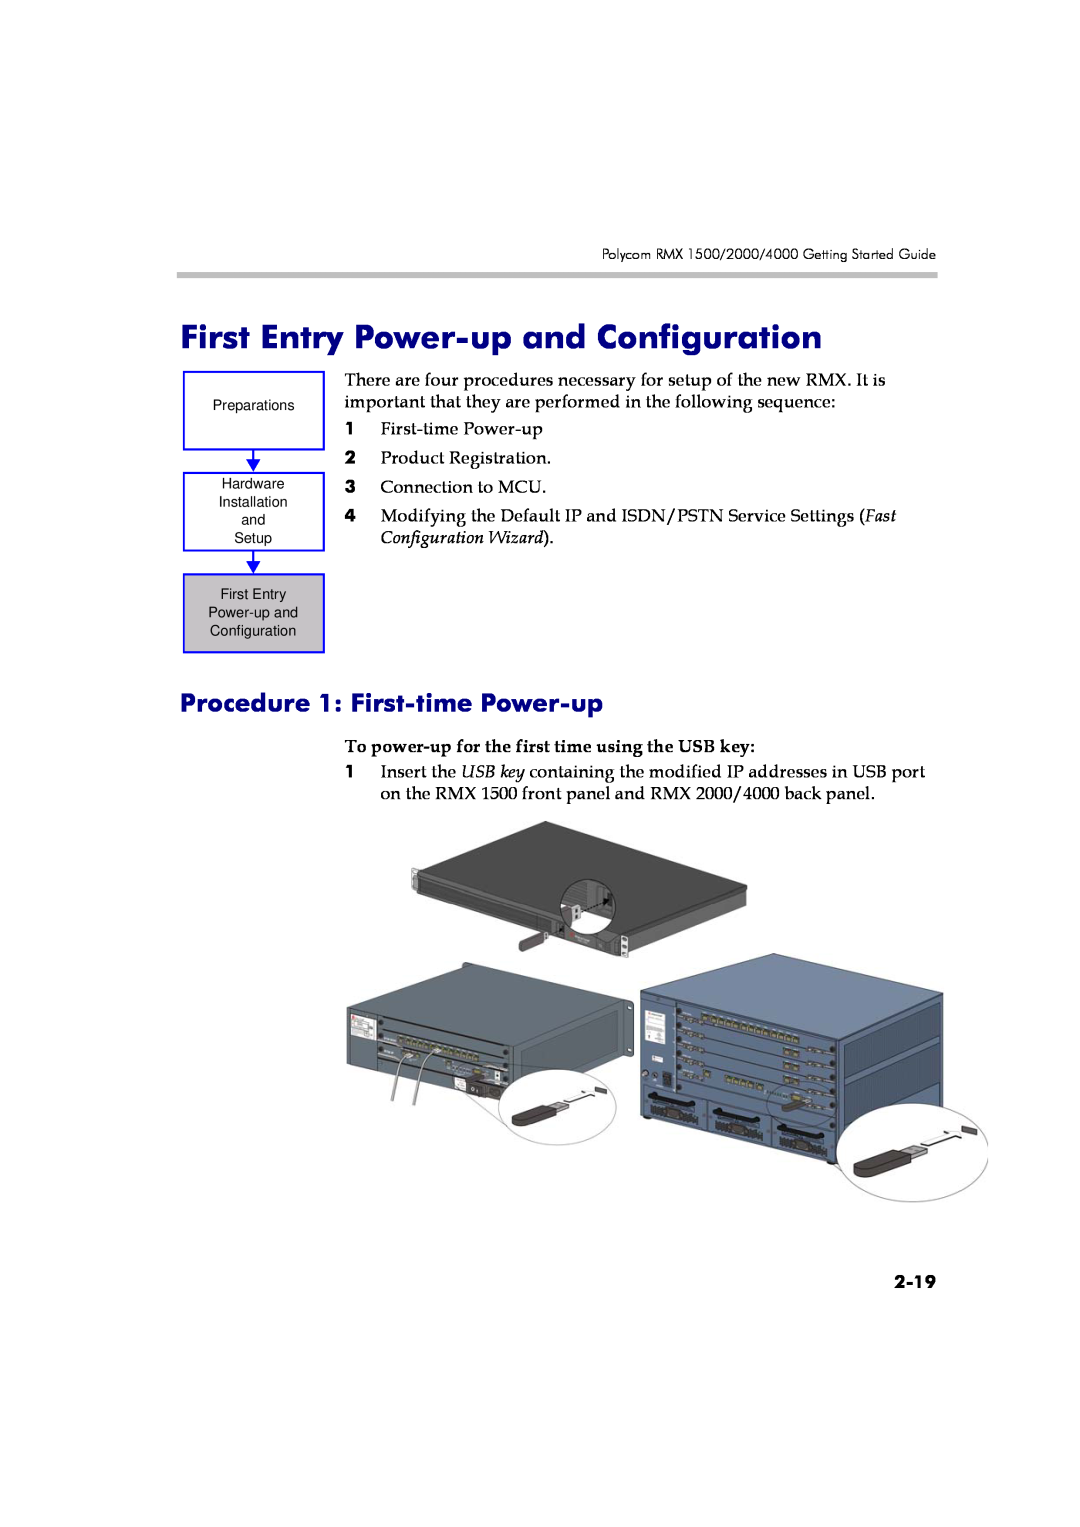 Polycom DOC2560A manual First Entry Power-up and Configuration, Procedure 1 First-time Power-up, 2-19 